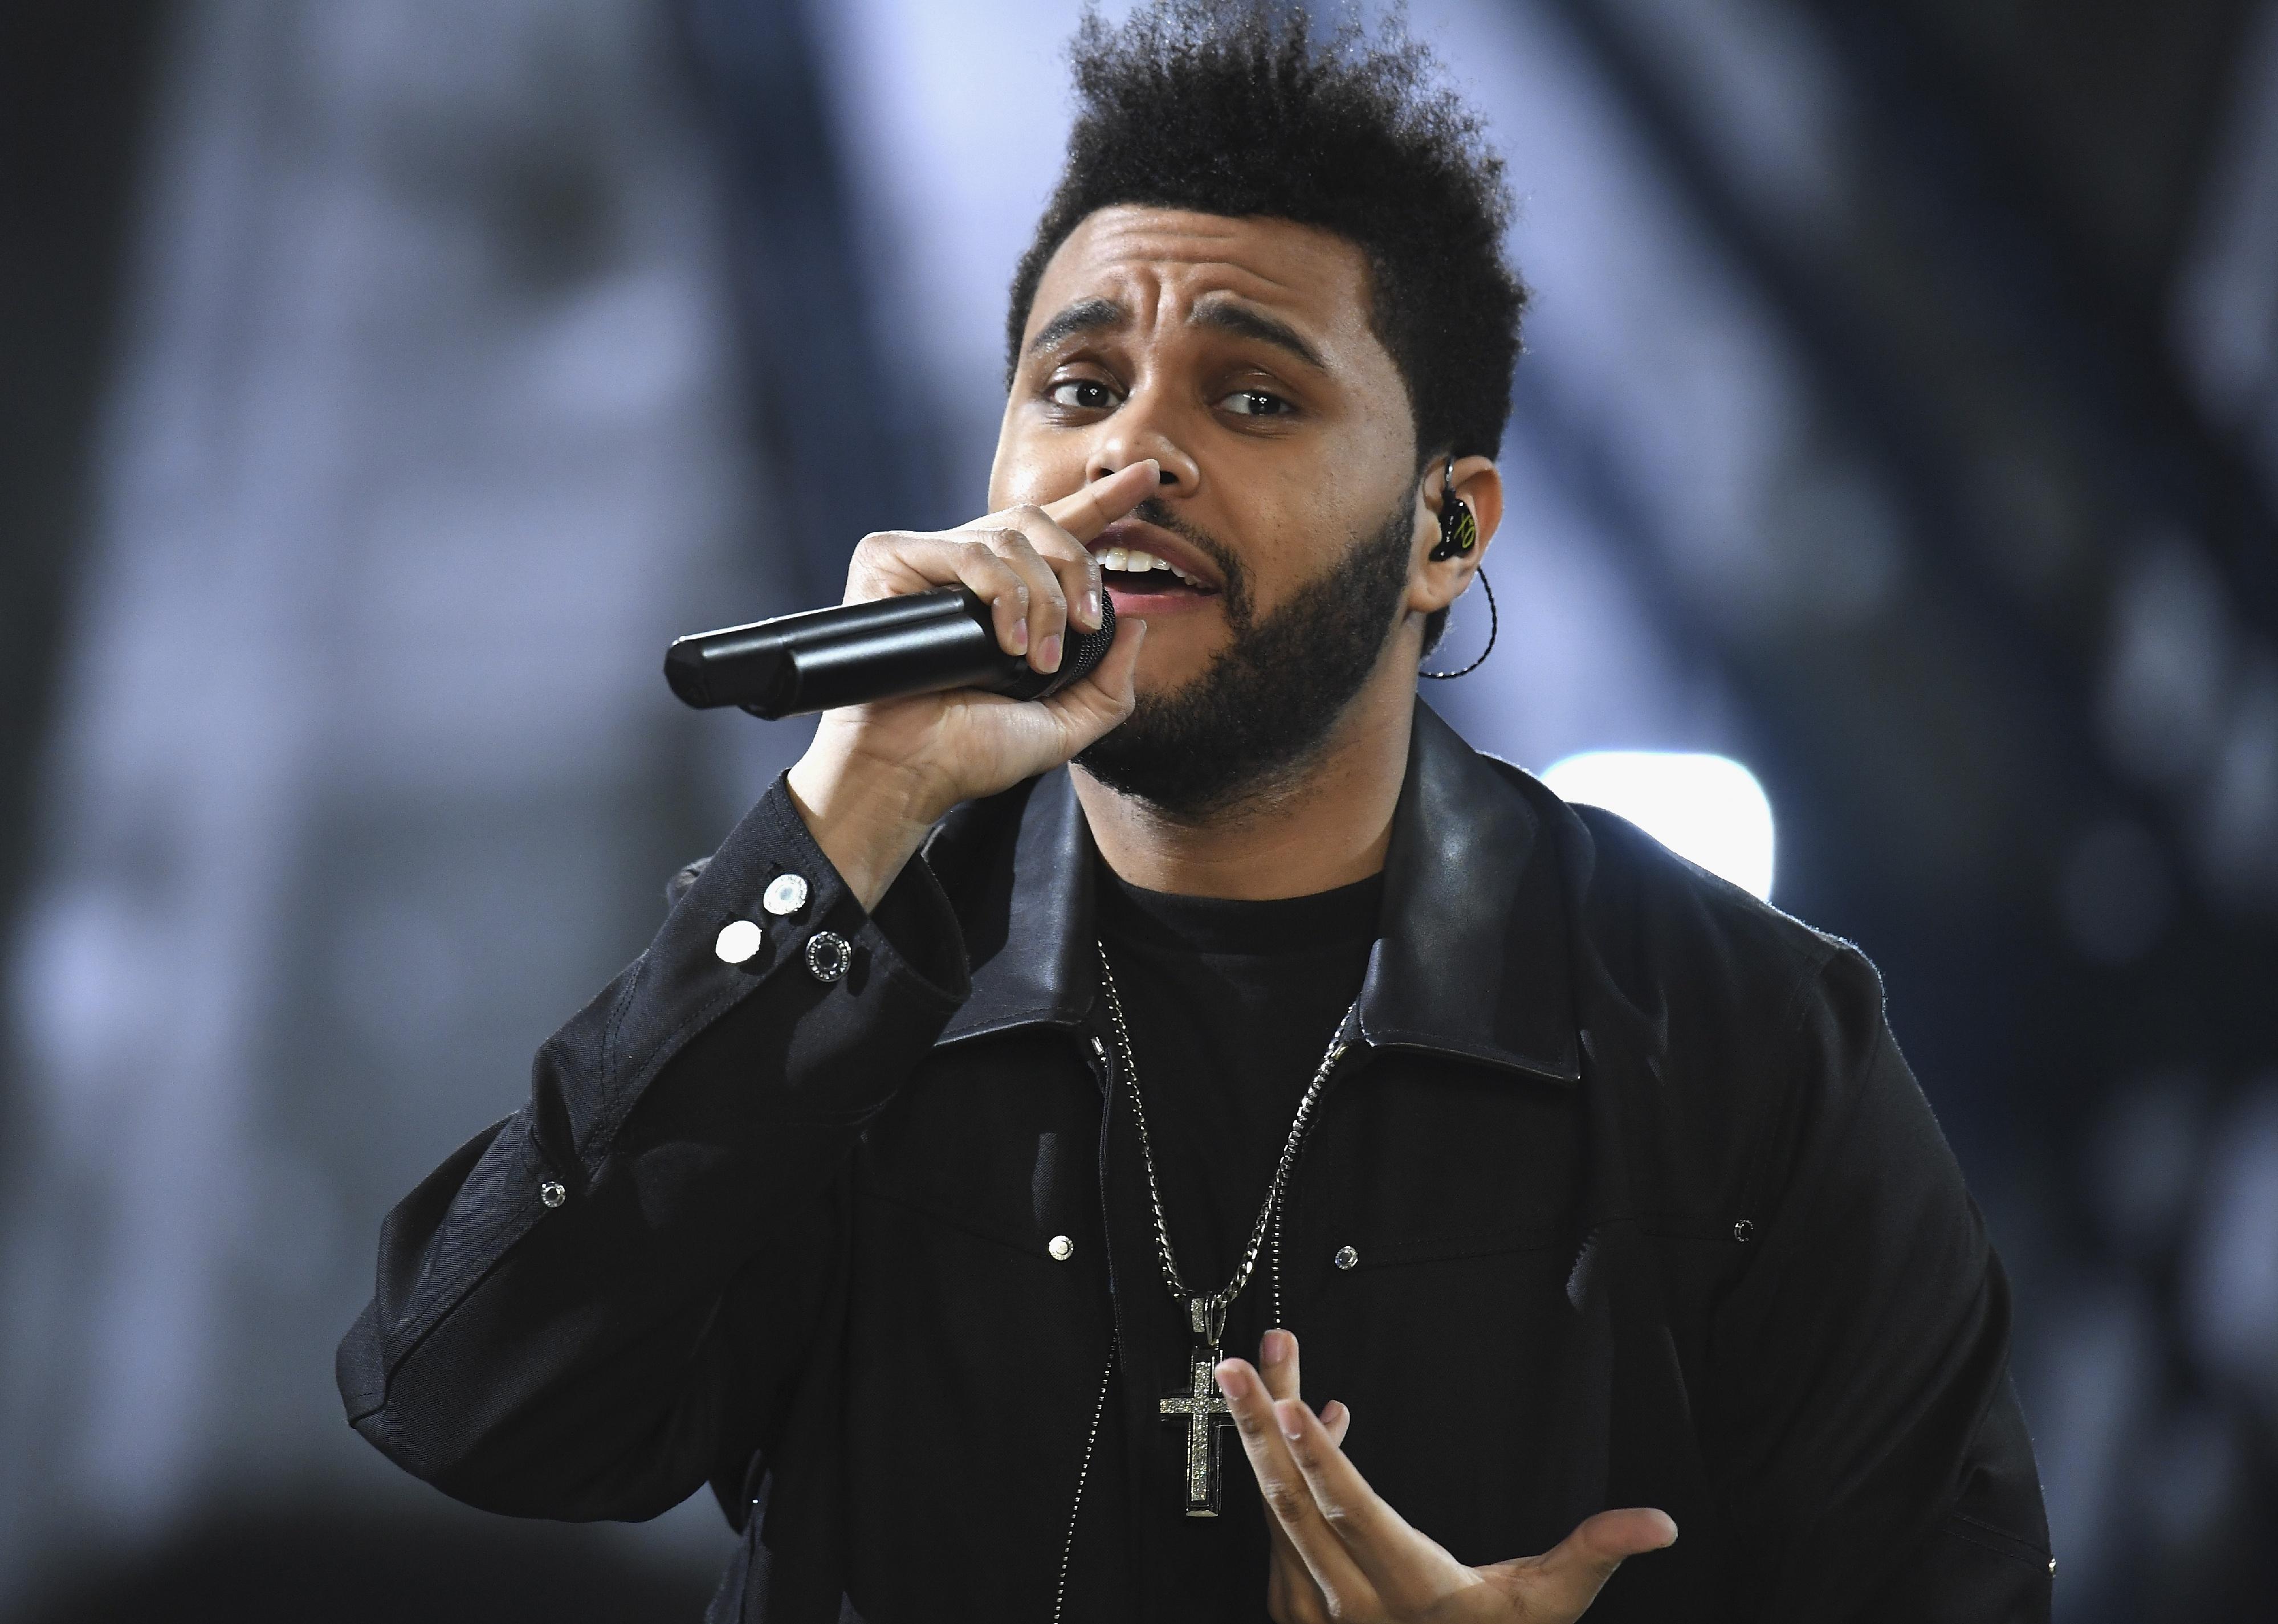 The Weeknd performing onstage in a black leather jacket.